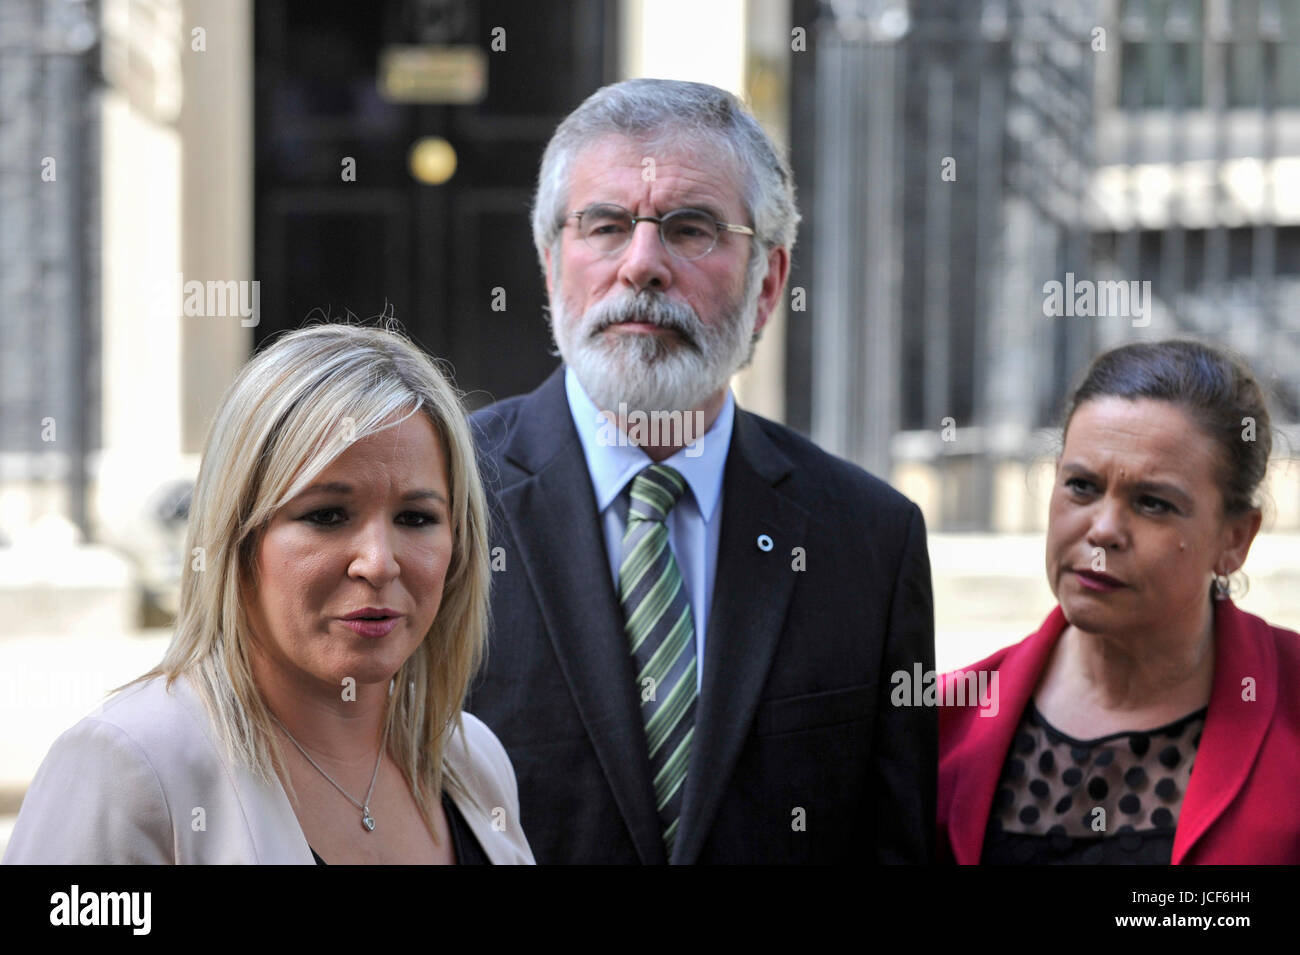 London, UK. 15th June, 2017. (L to R) Michelle O'Neill, leader of Sinn Féin, Gerry Adams, President, and Mary Lou McDonald give a press conference outside Number 10. Members of the Northern Ireland Assembly visit Downing Street for talks with Prime Minister Theresa May following the results of the General Election. The Conservatives are seeking to work with the Democratic Unionist Party in order to form a minority government. Credit: Stephen Chung/Alamy Live News Stock Photo